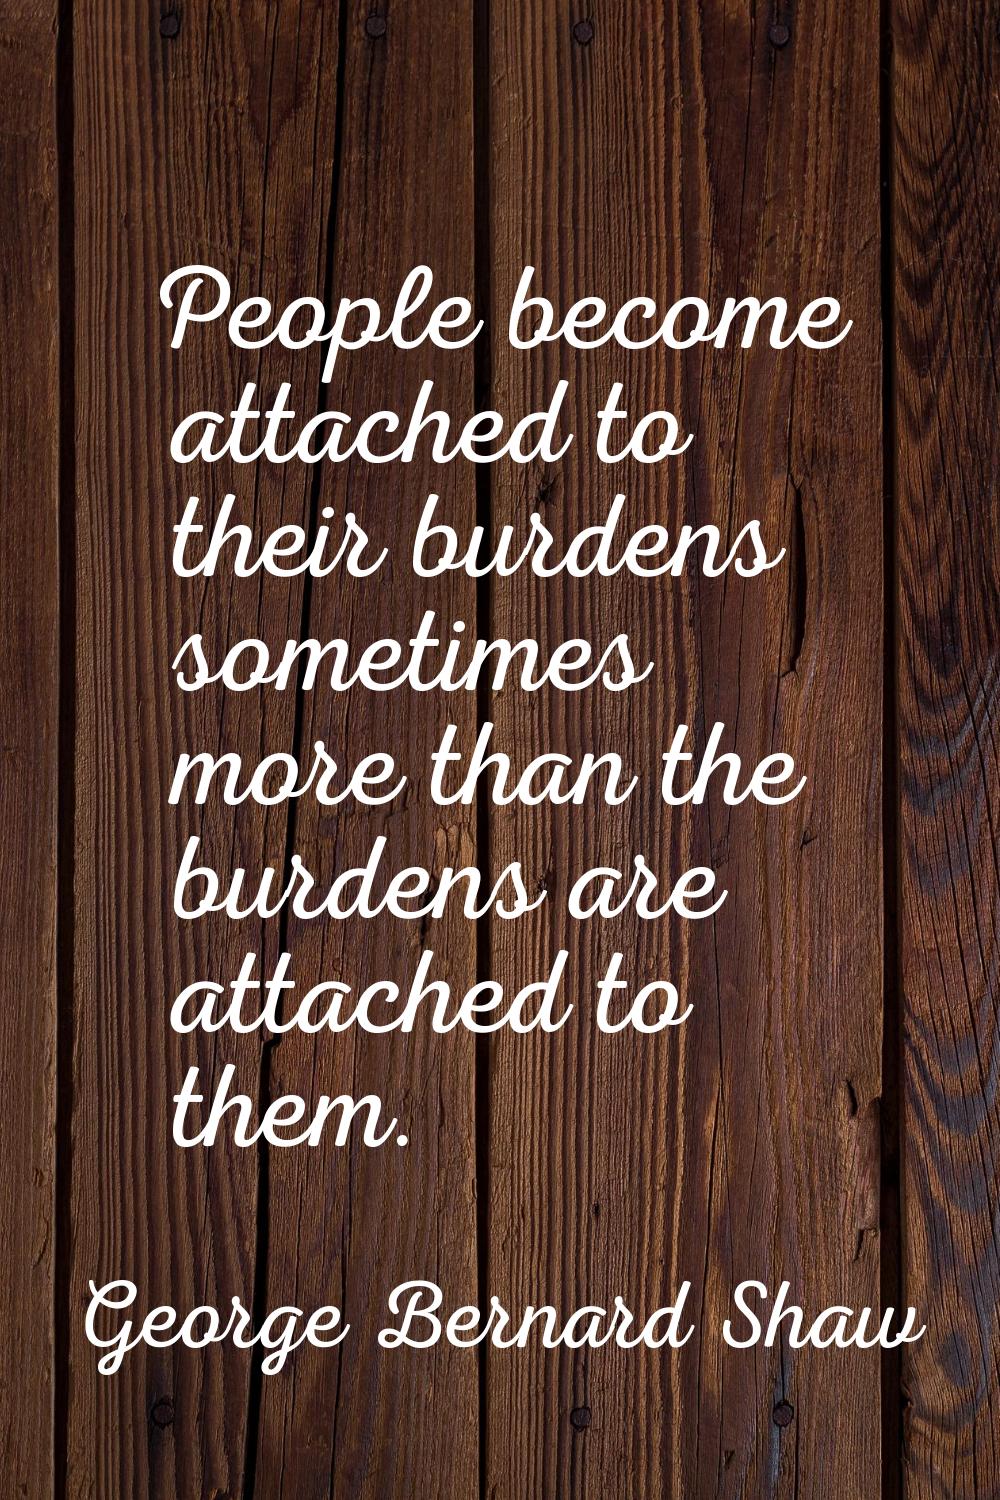 People become attached to their burdens sometimes more than the burdens are attached to them.